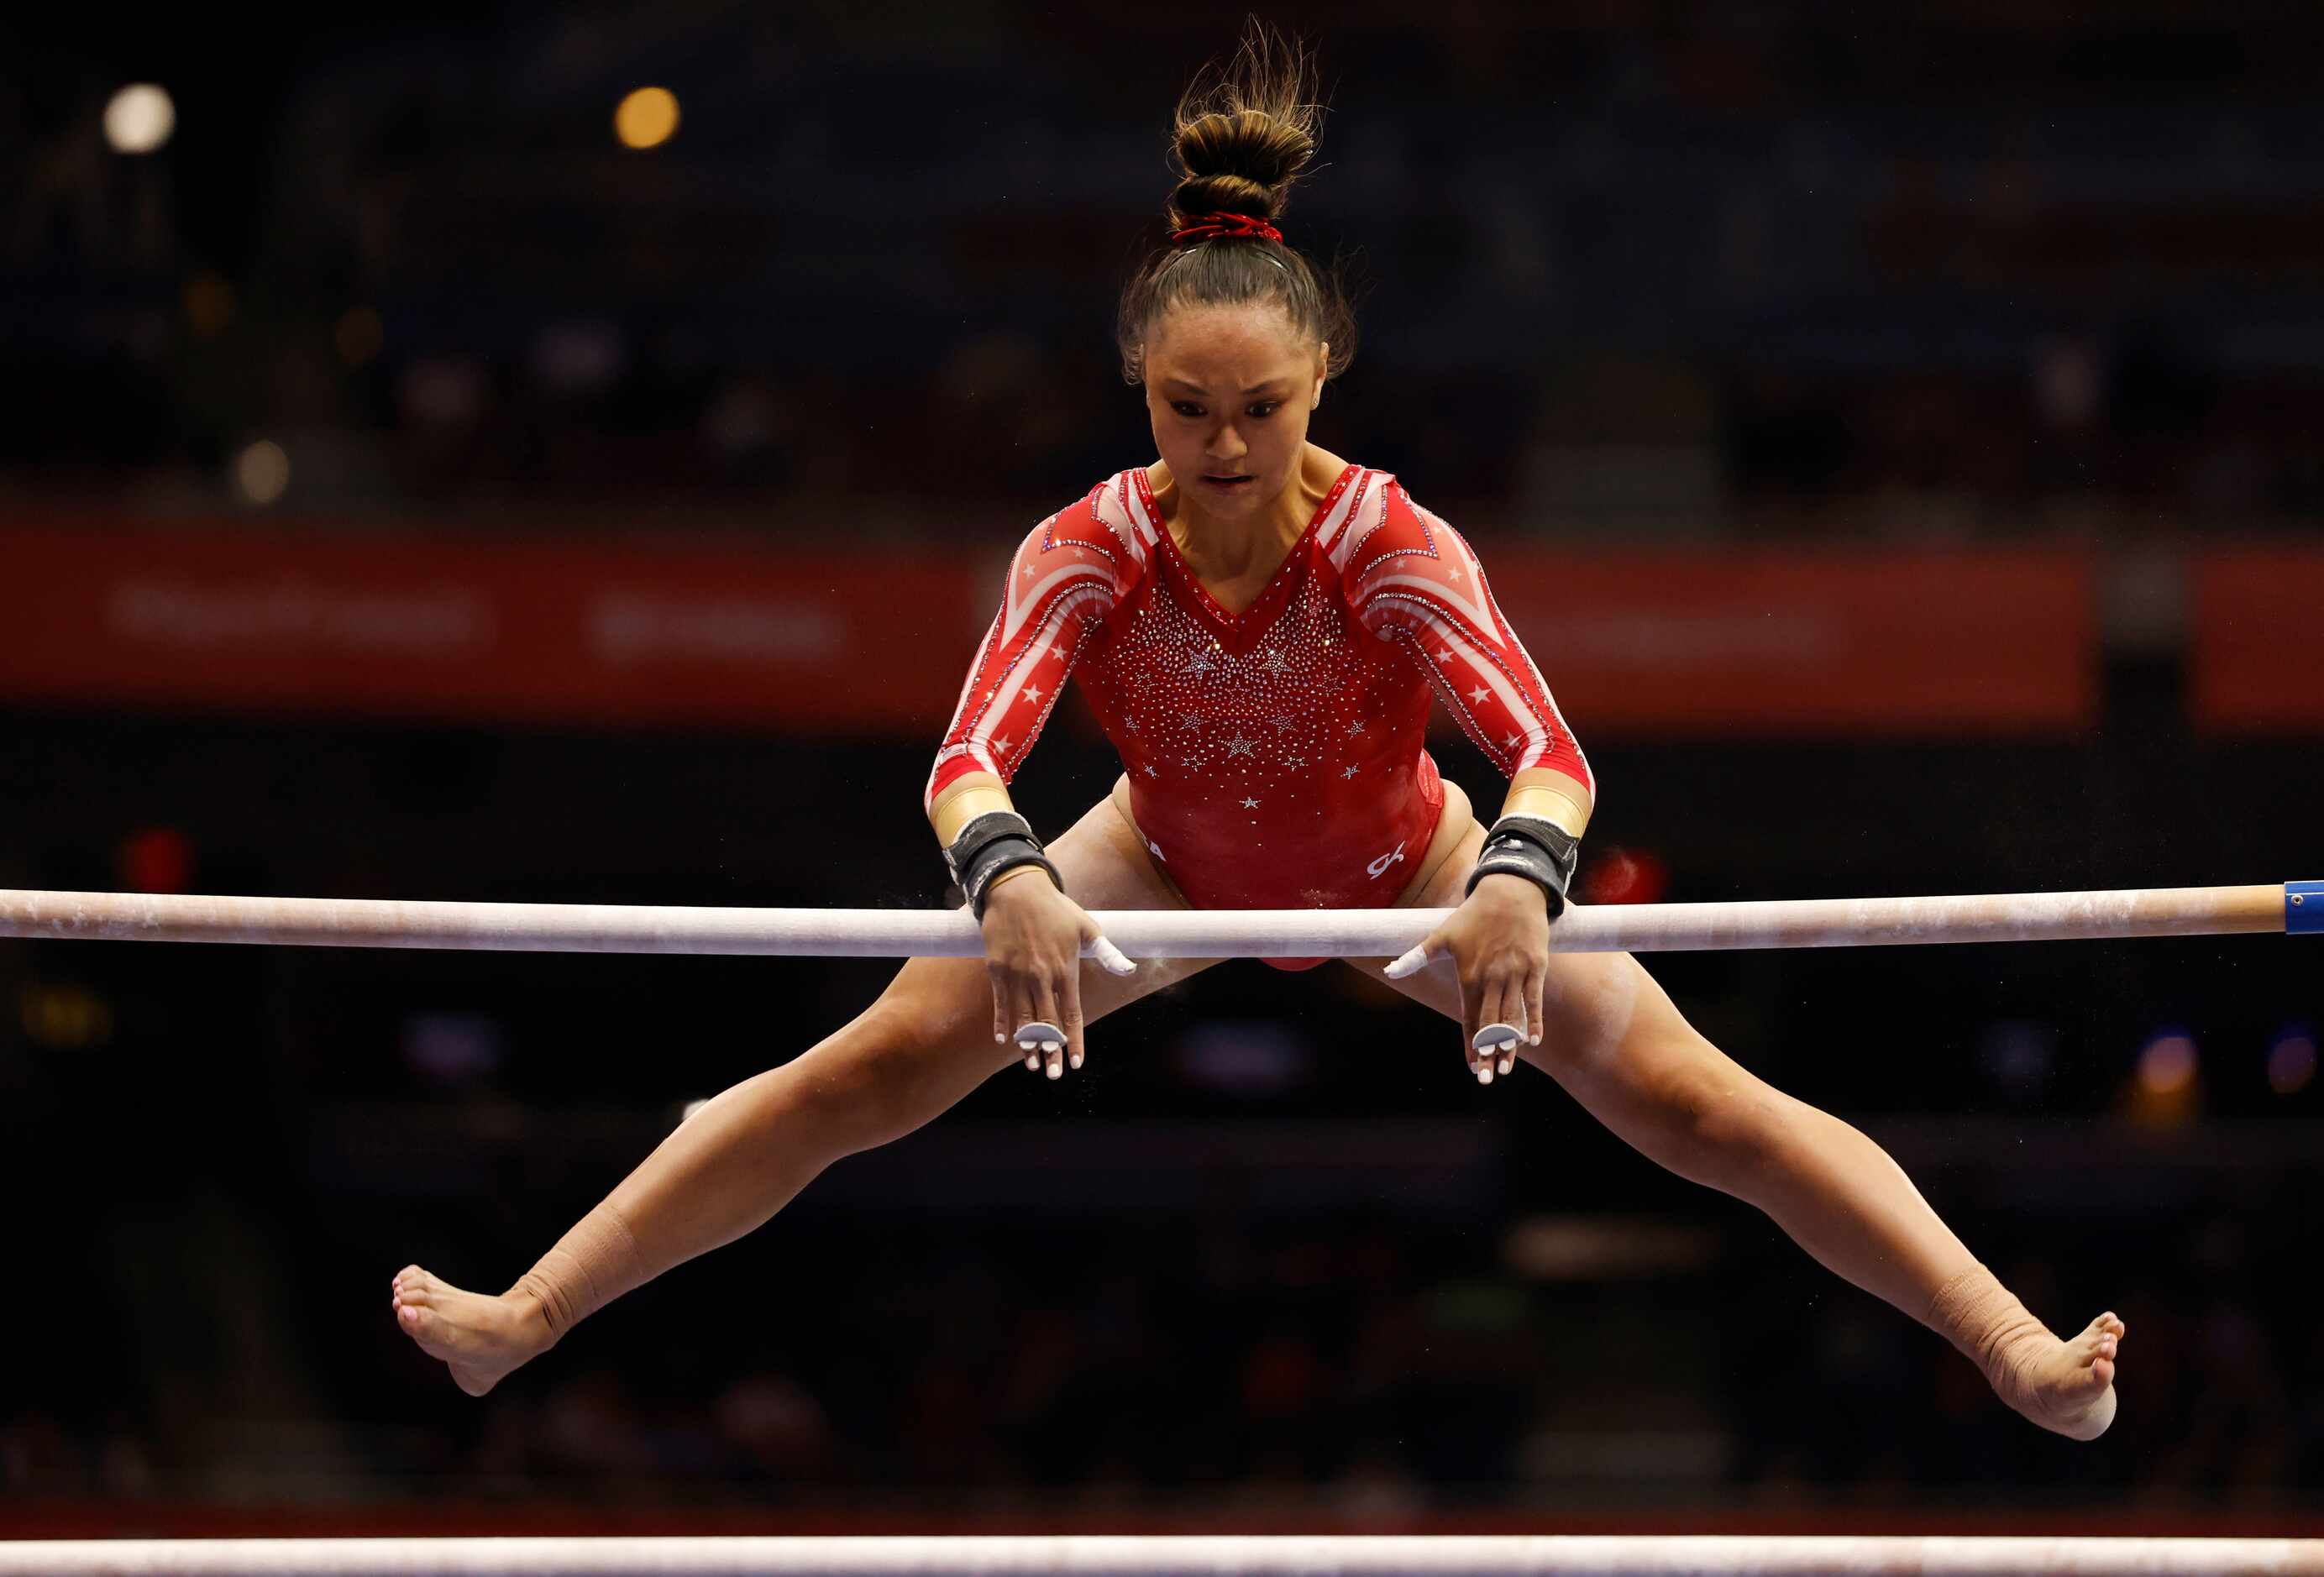 Emma Malabuyo competes on the uneven bars during day 2 of the women's 2021 U.S. Olympic...